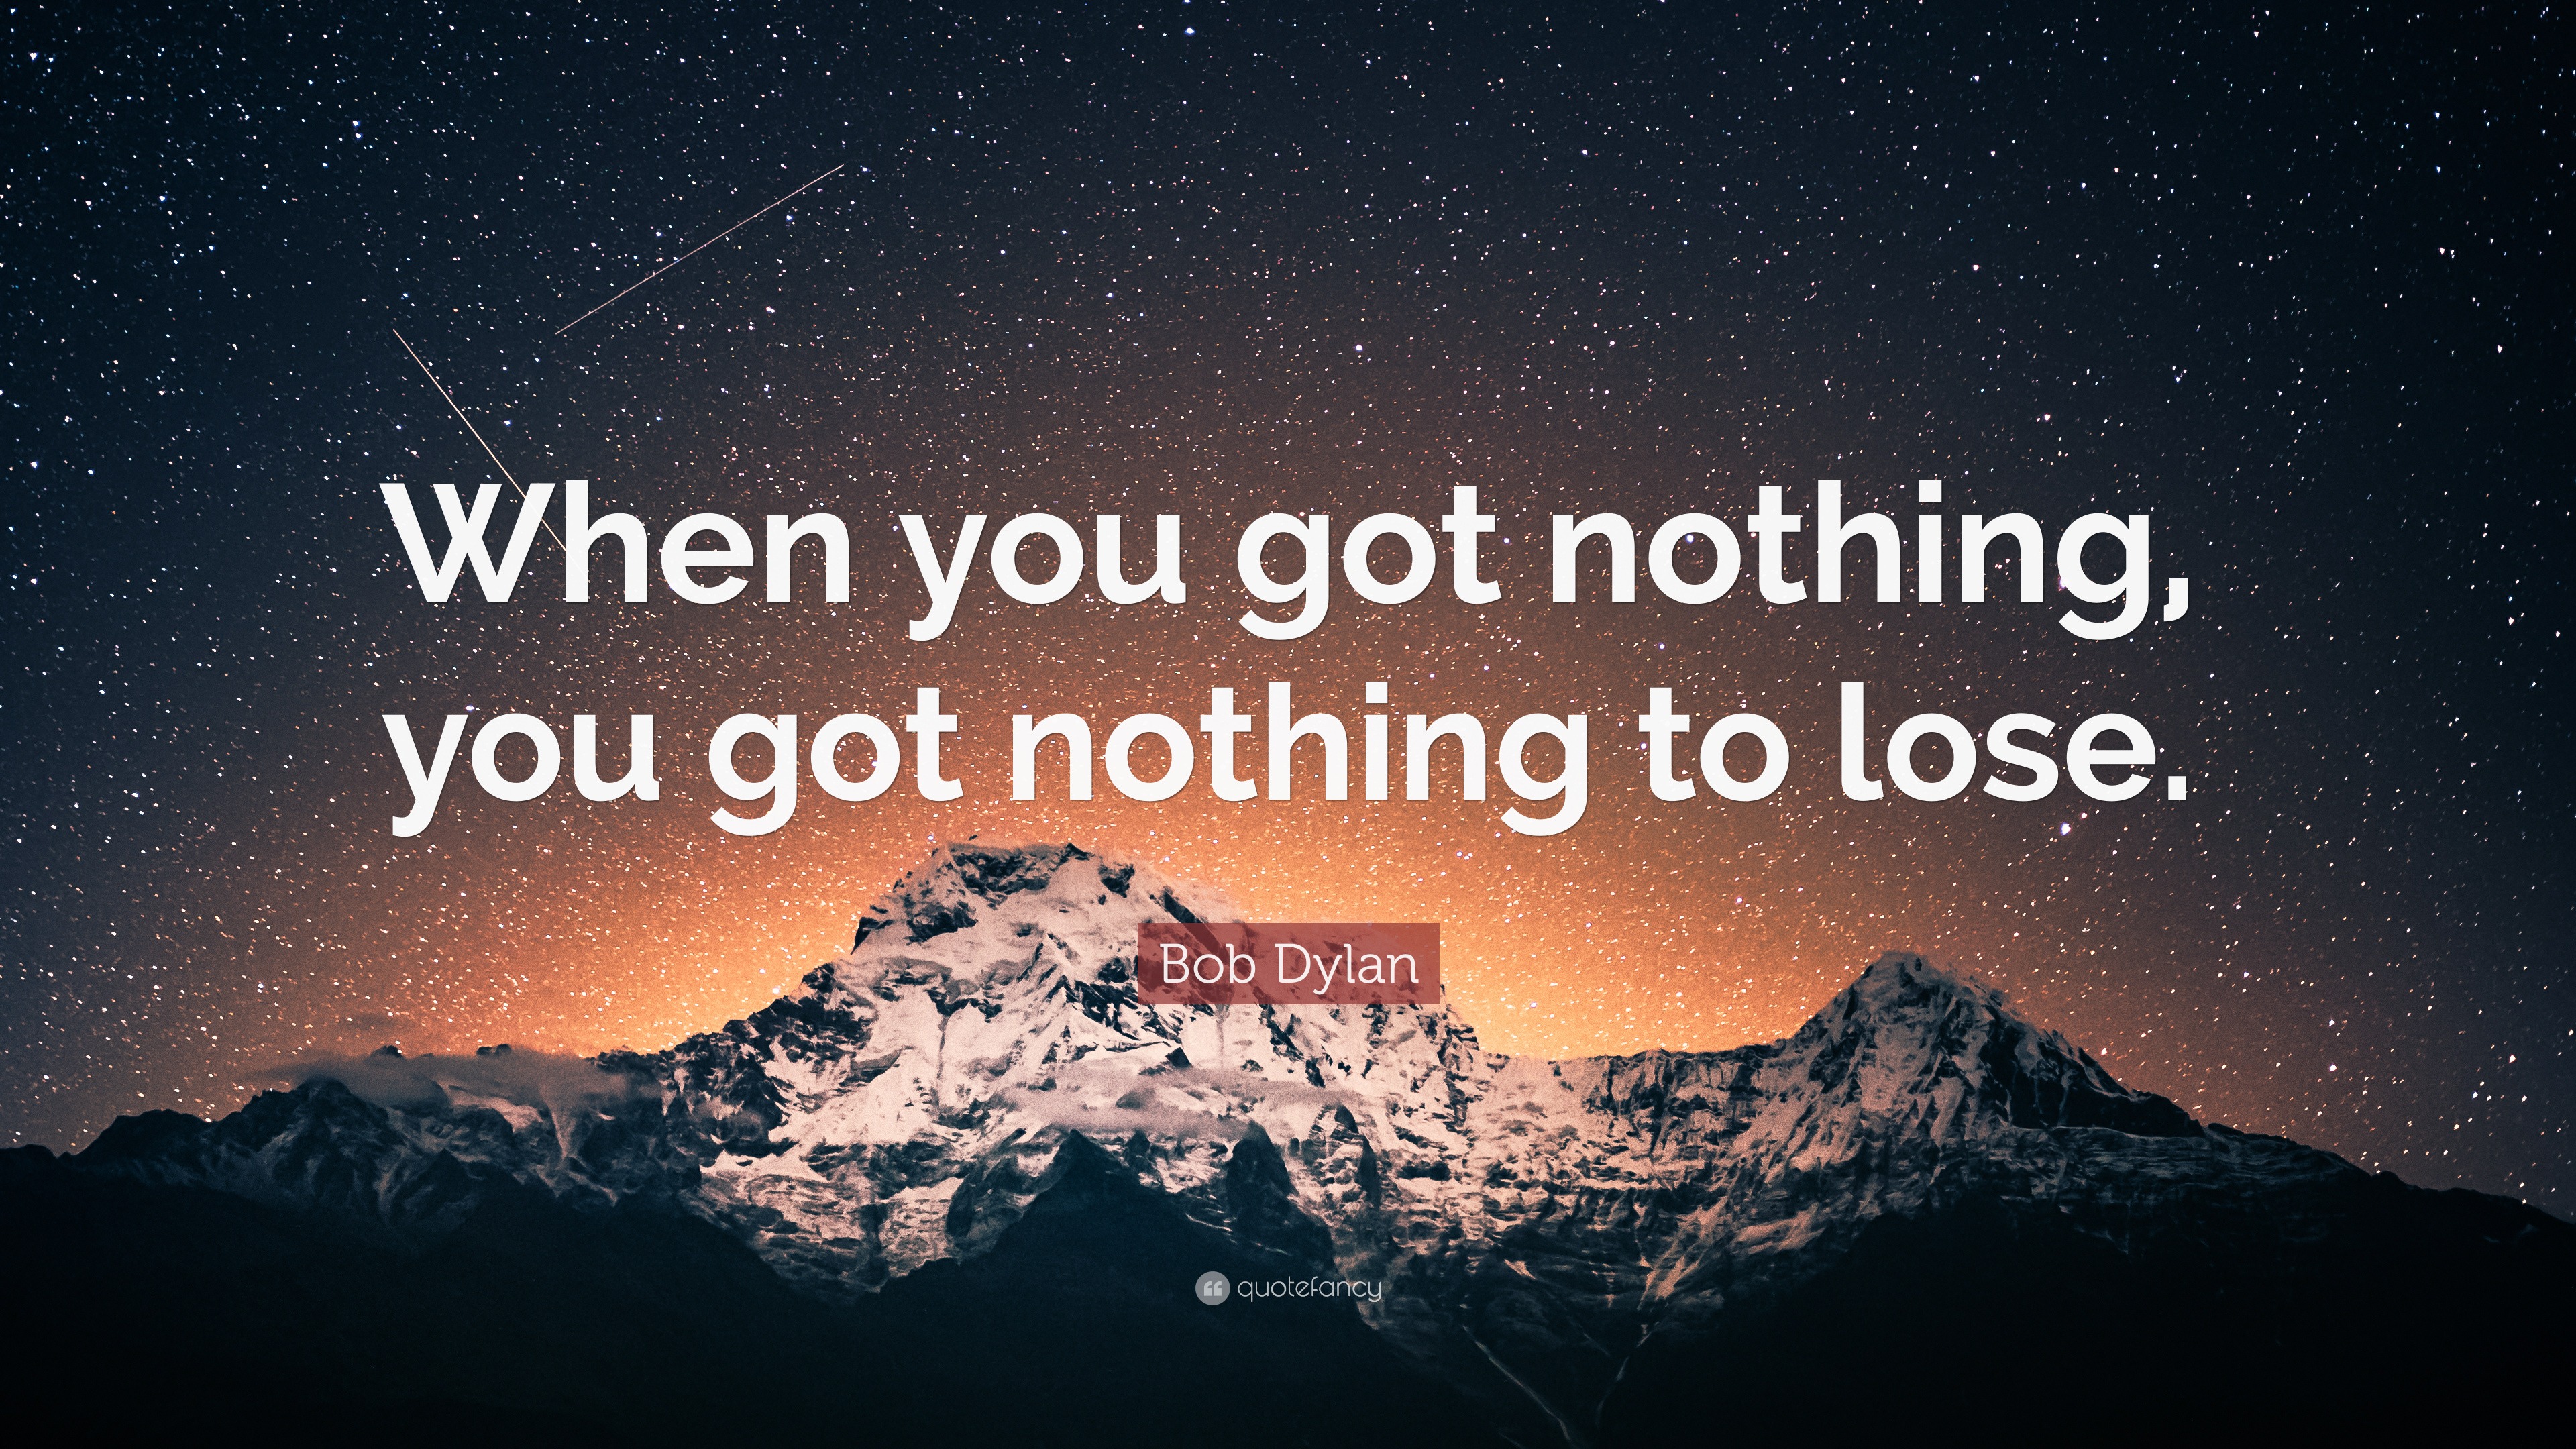 https://quotefancy.com/media/wallpaper/3840x2160/2008718-Bob-Dylan-Quote-When-you-got-nothing-you-got-nothing-to-lose.jpg